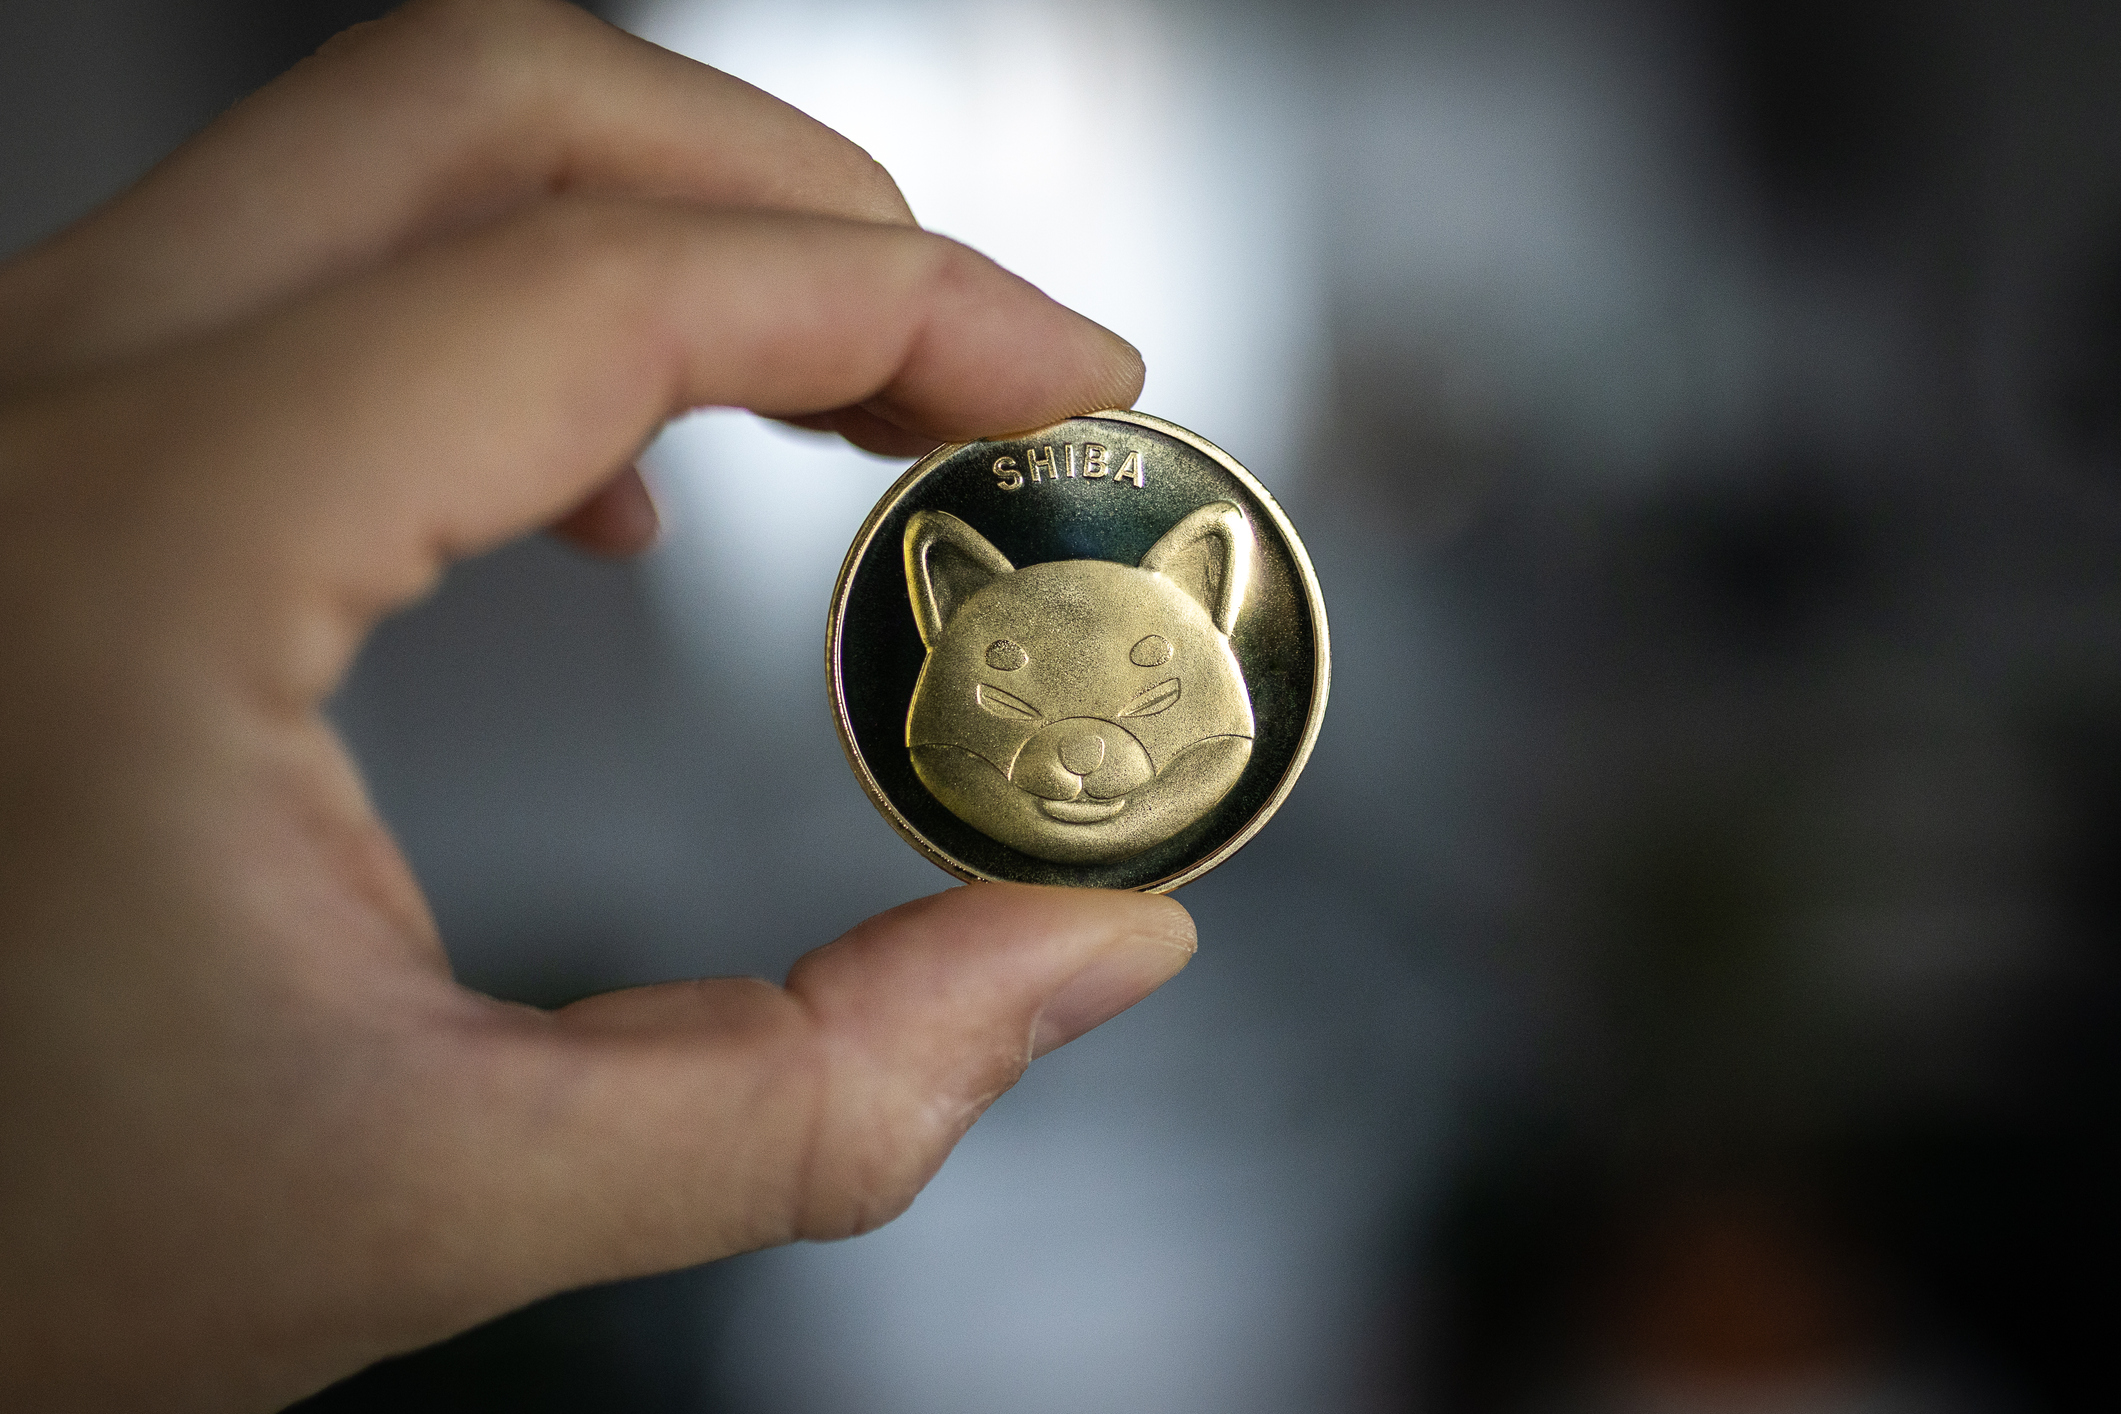 Shiba Inu Announces Partnership With D3 Global, Price Plunges